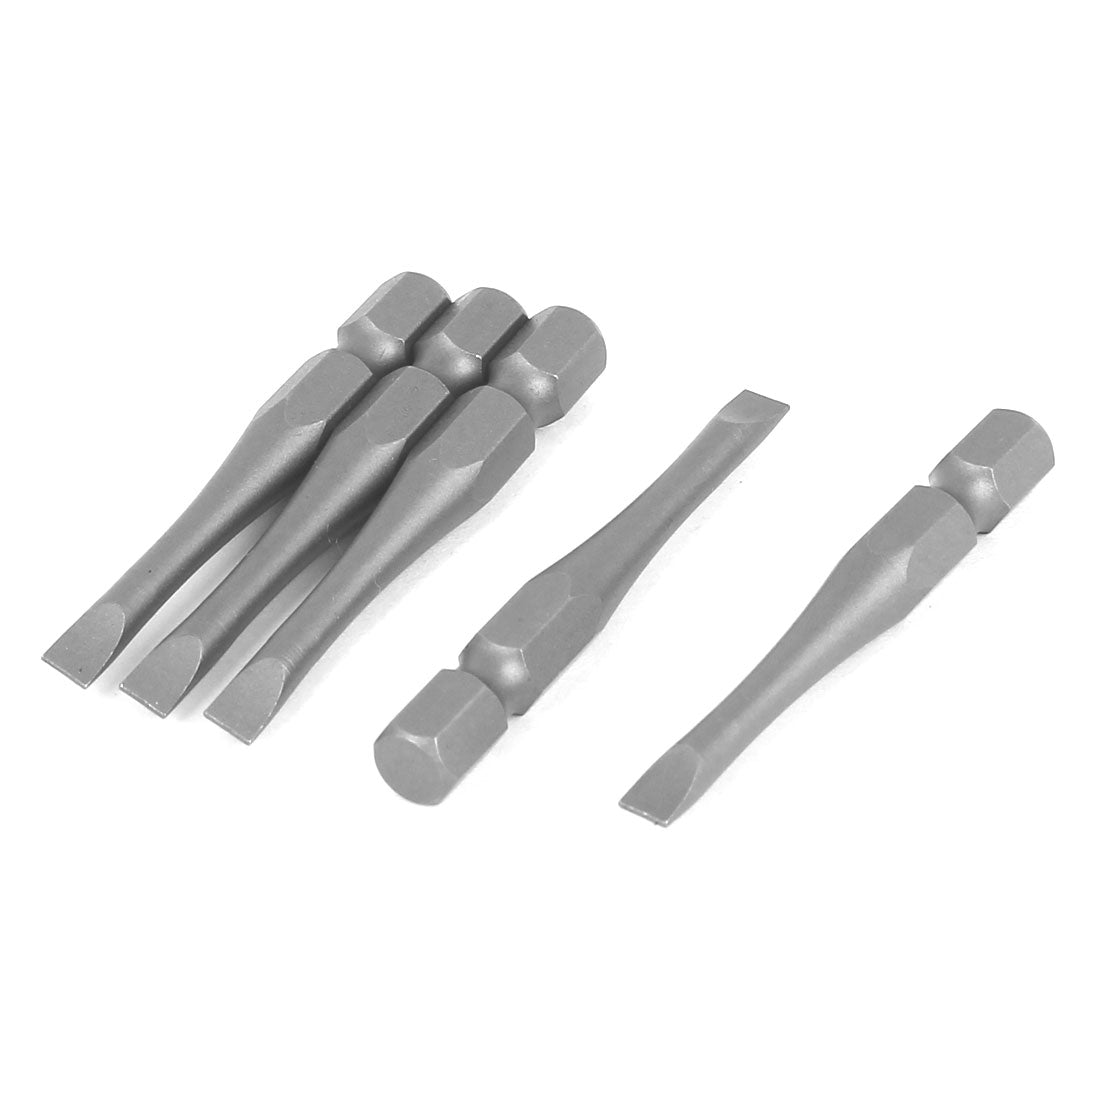 uxcell Uxcell 50mm Length 4mm Tip Magnetic Slotted Insert Screwdriver Bit 5pcs